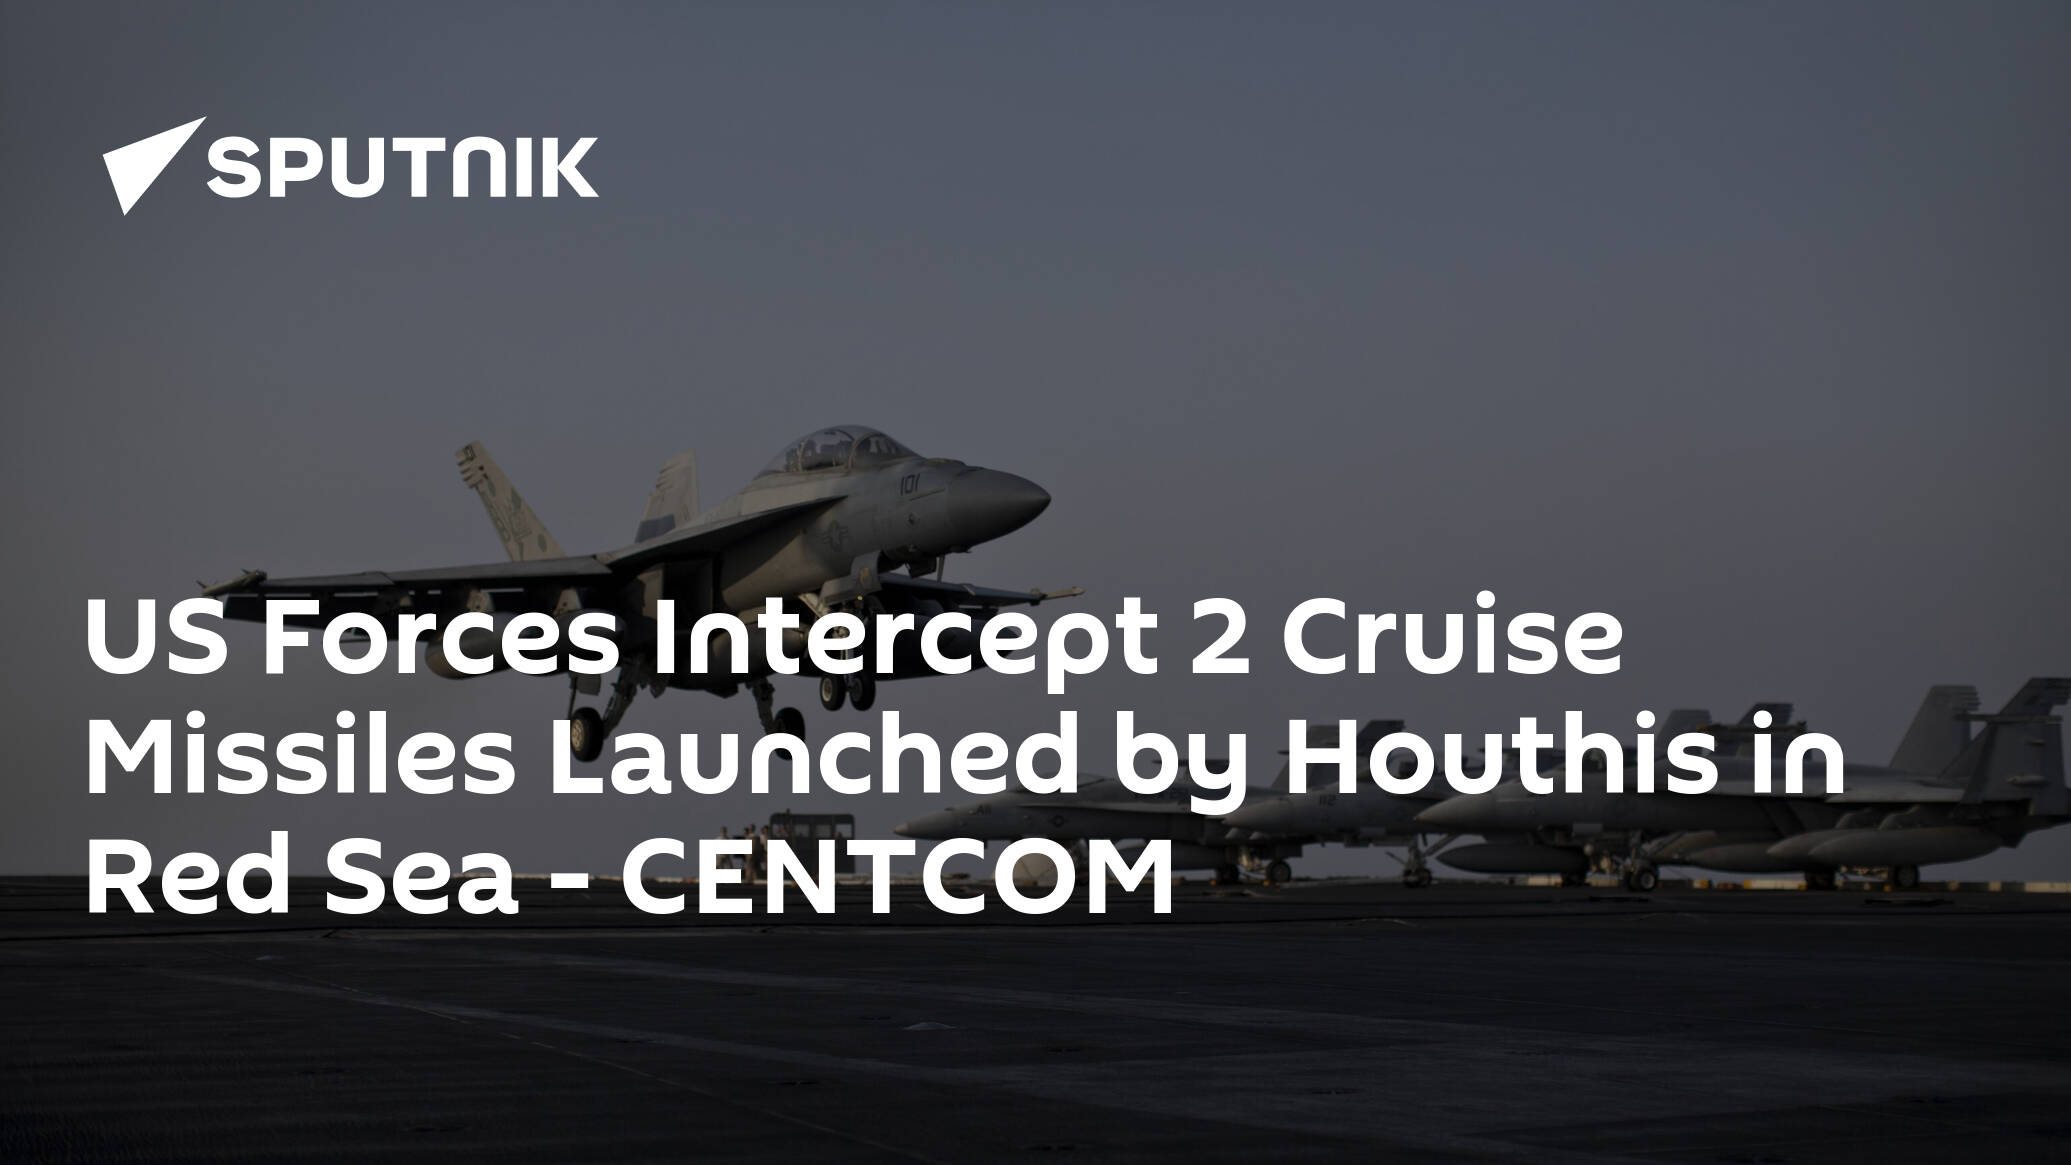 US Forces Intercept 2 Cruise Missiles Launched by Houthis in Red Sea – CENTCOM